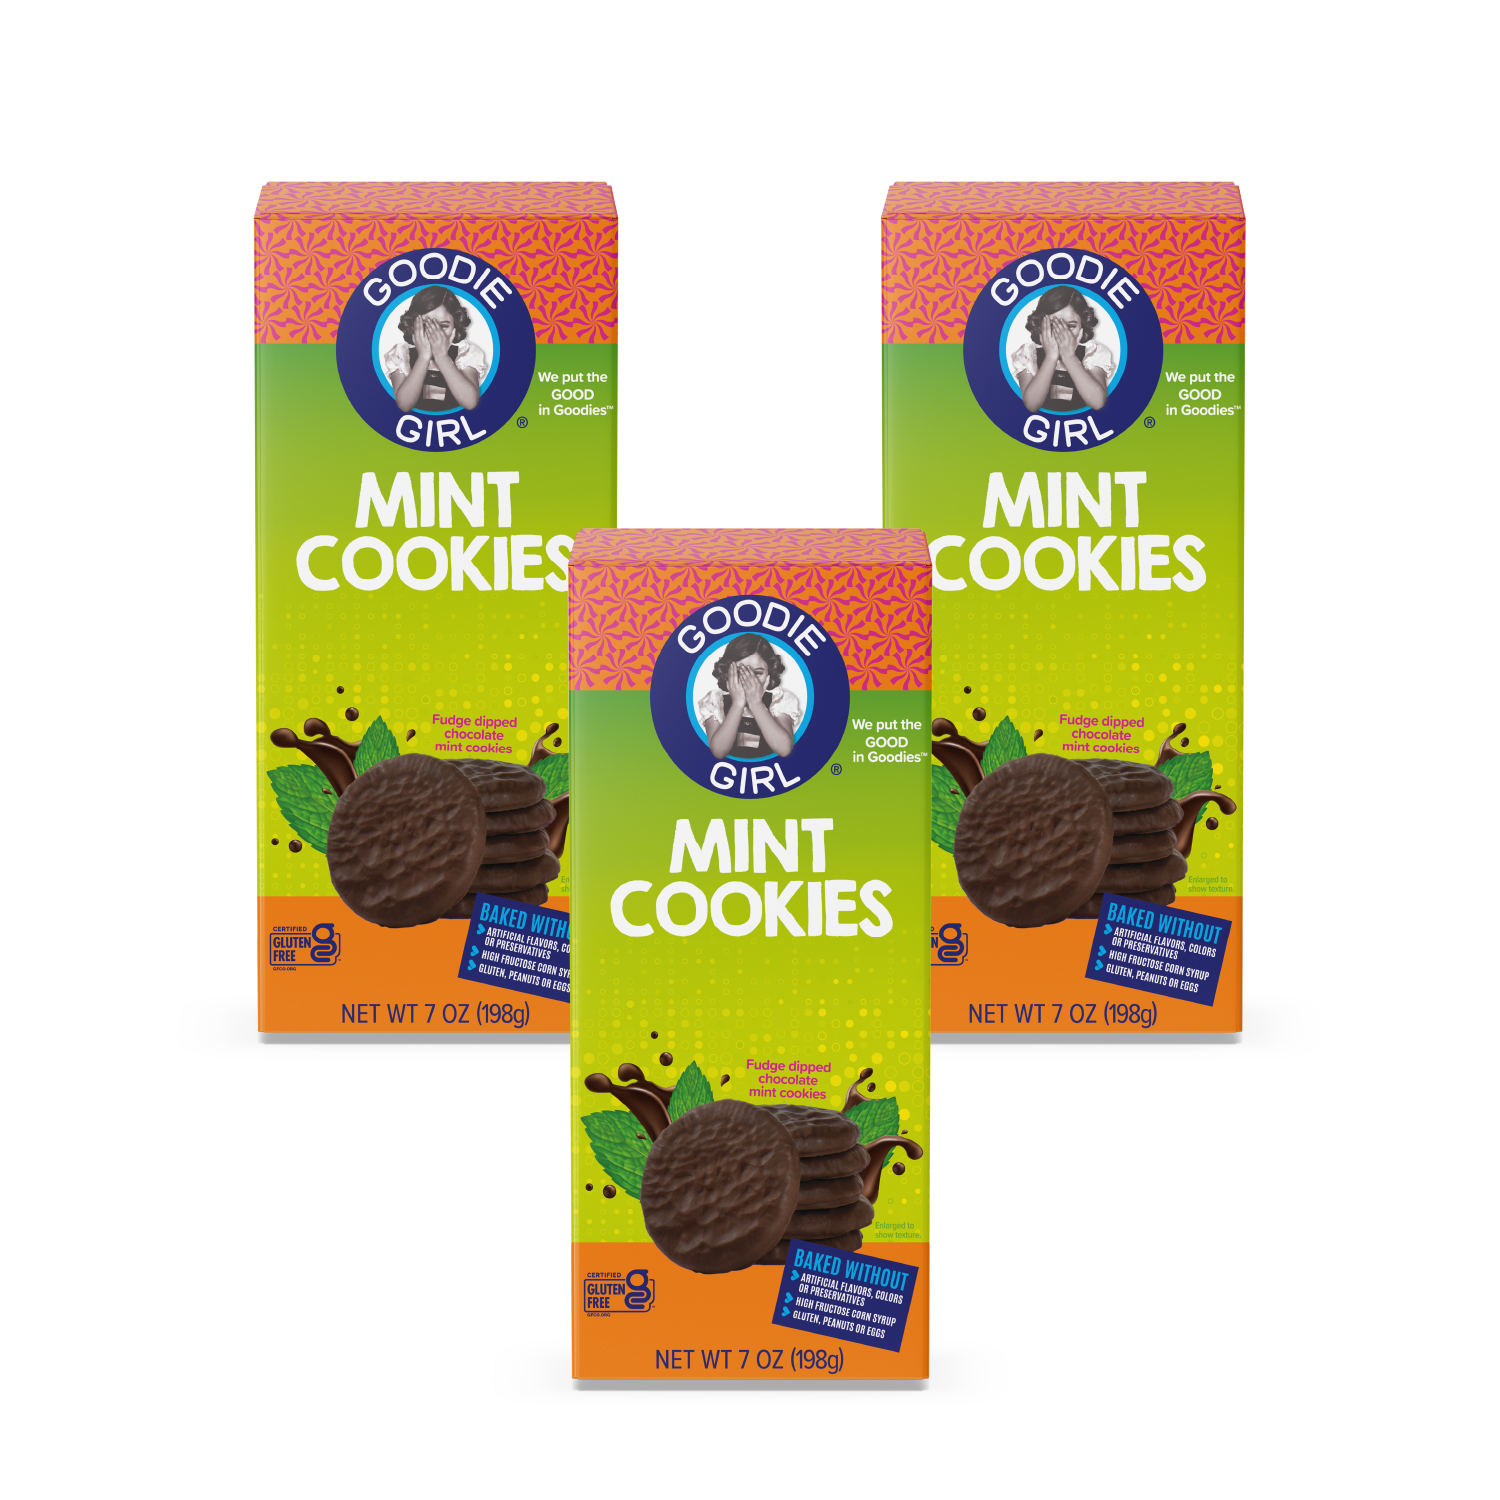 Goodie Girl Mint Cookies, Gluten Free, Shelf Stable, 7 oz Box - image 3 of 10